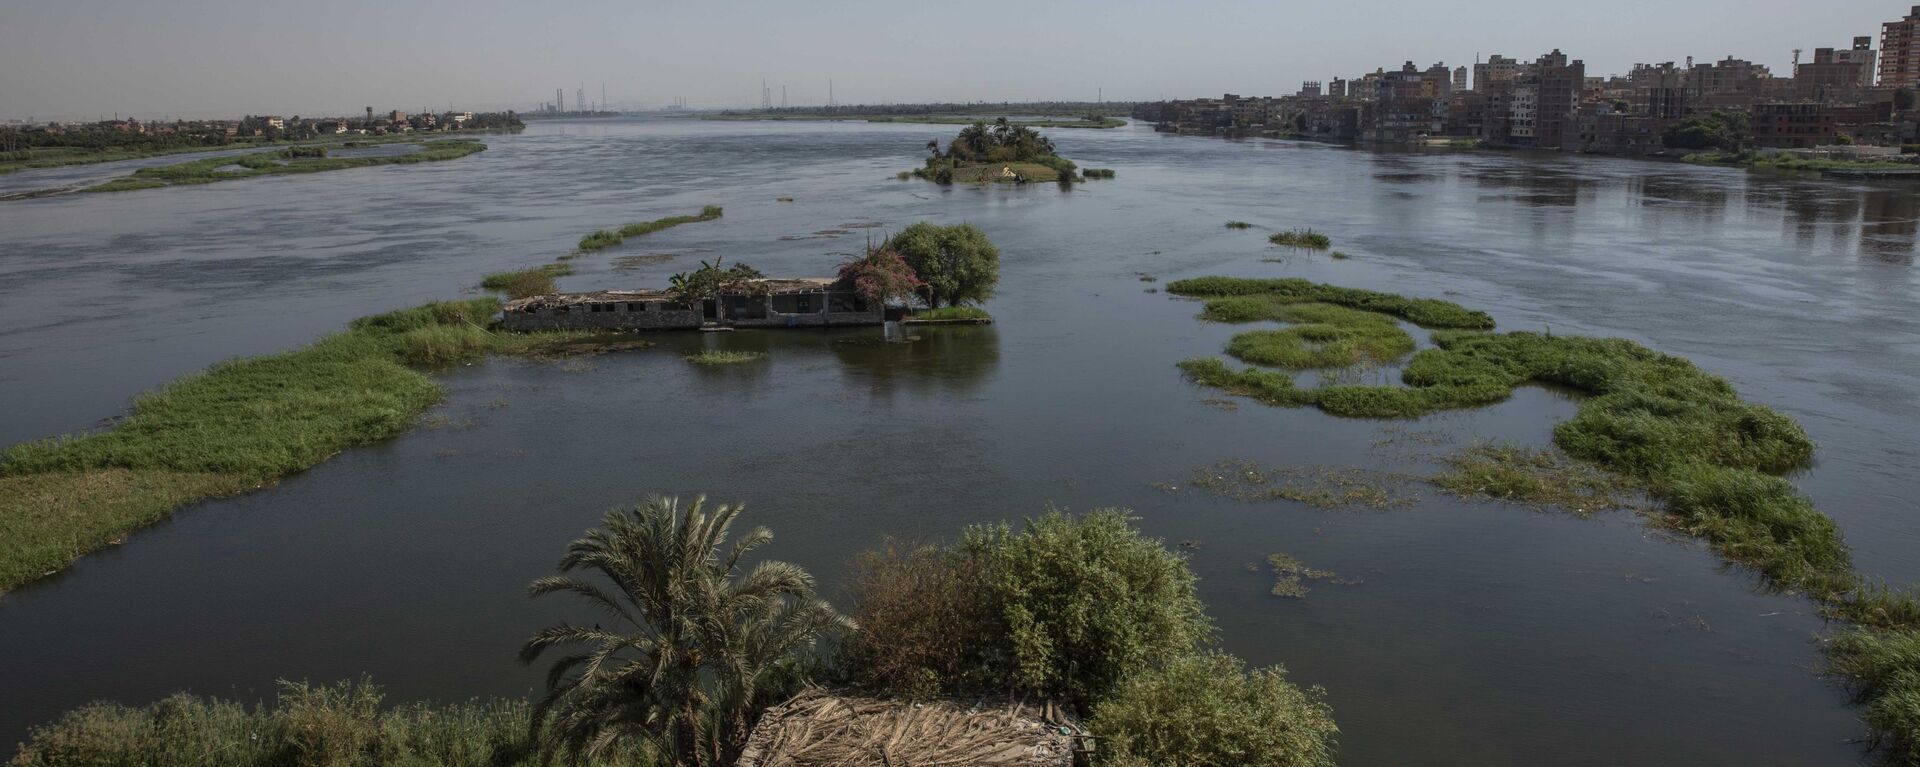 The River Nile as it passes through Beni Suef, Egypt. The Egyptians fear water levels will go down if the Ethiopian dam goes ahead. - Sputnik International, 1920, 14.06.2021